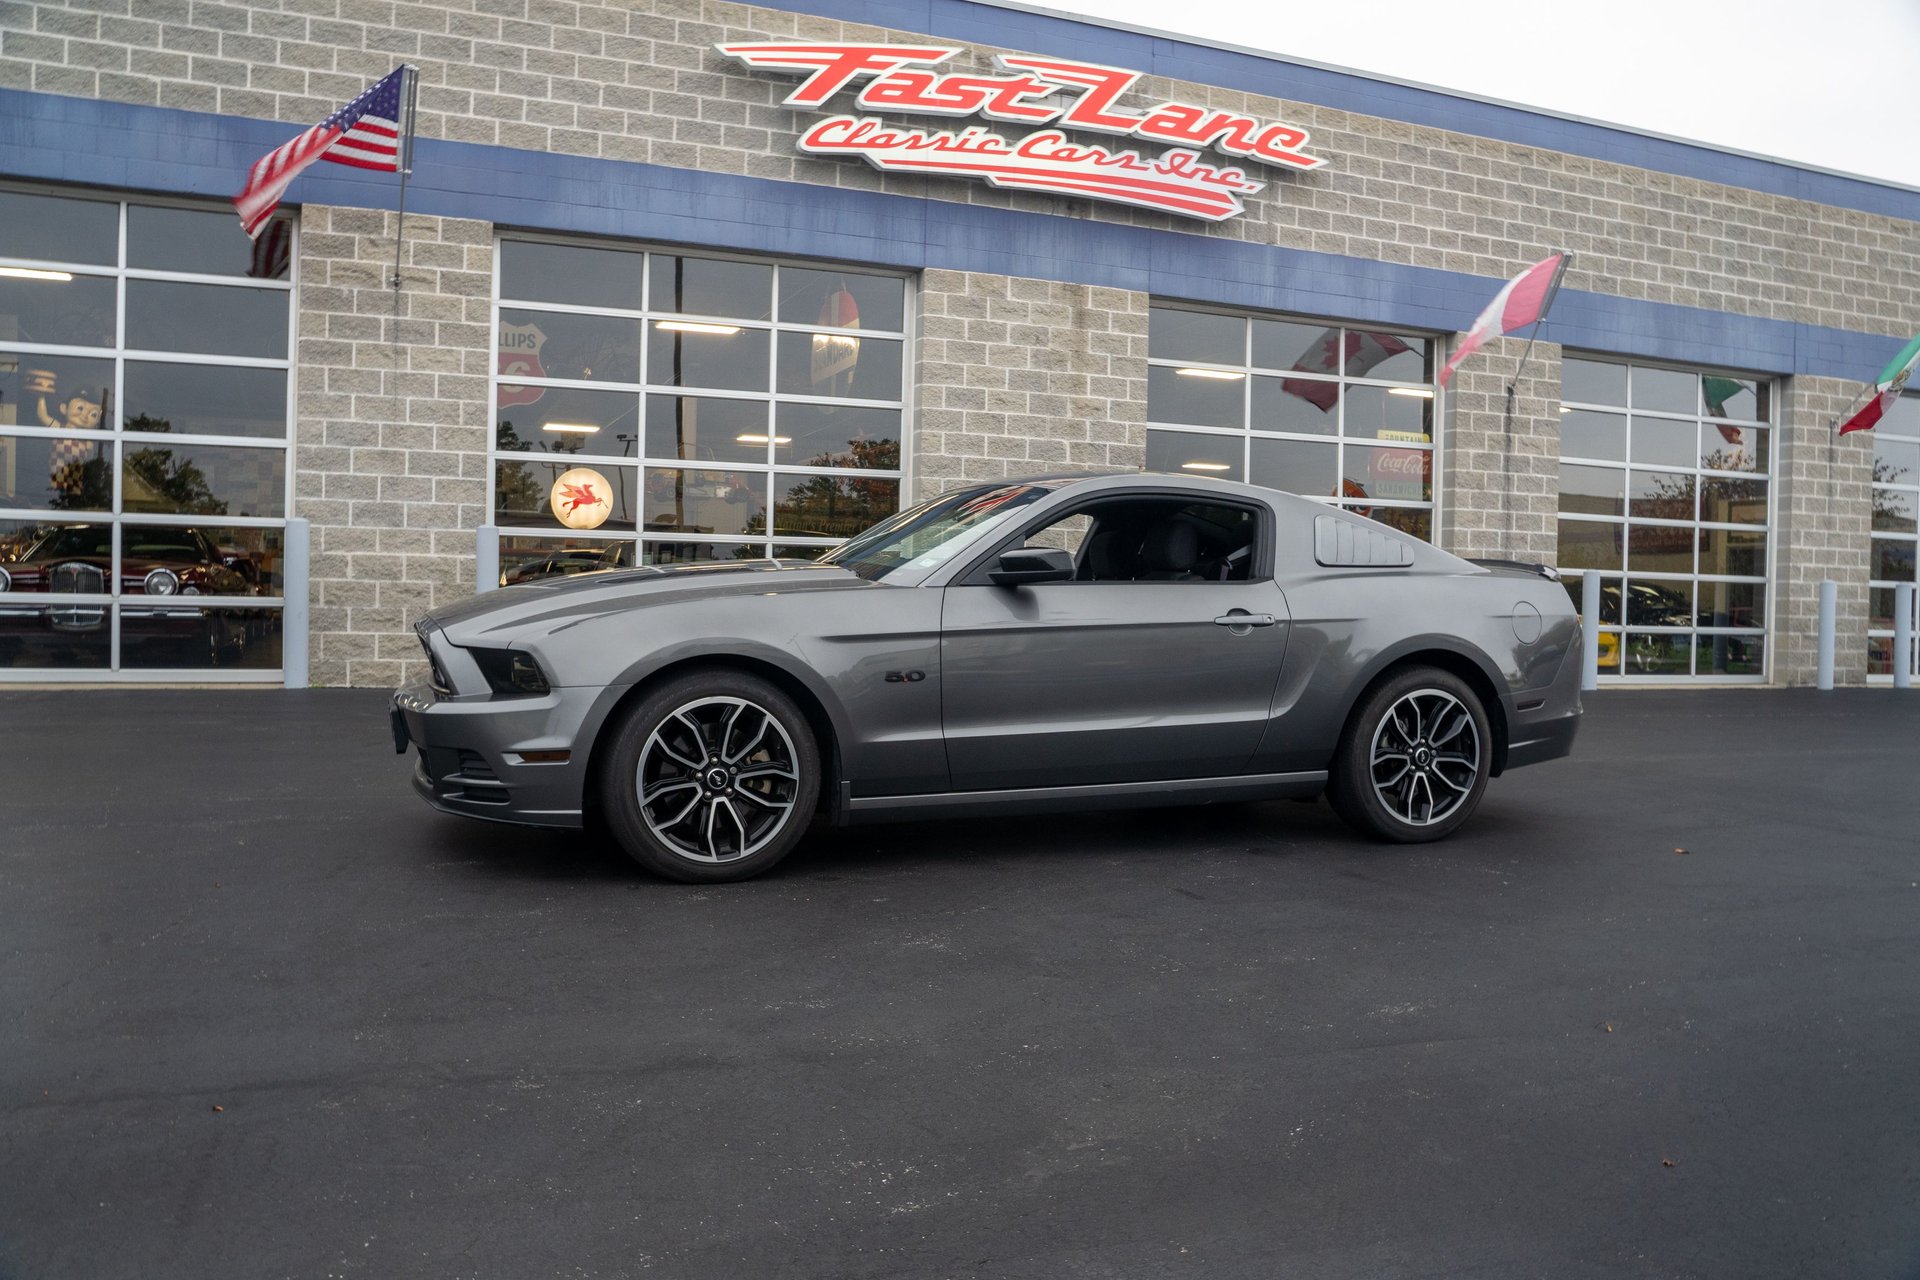 2014 ford mustang gt